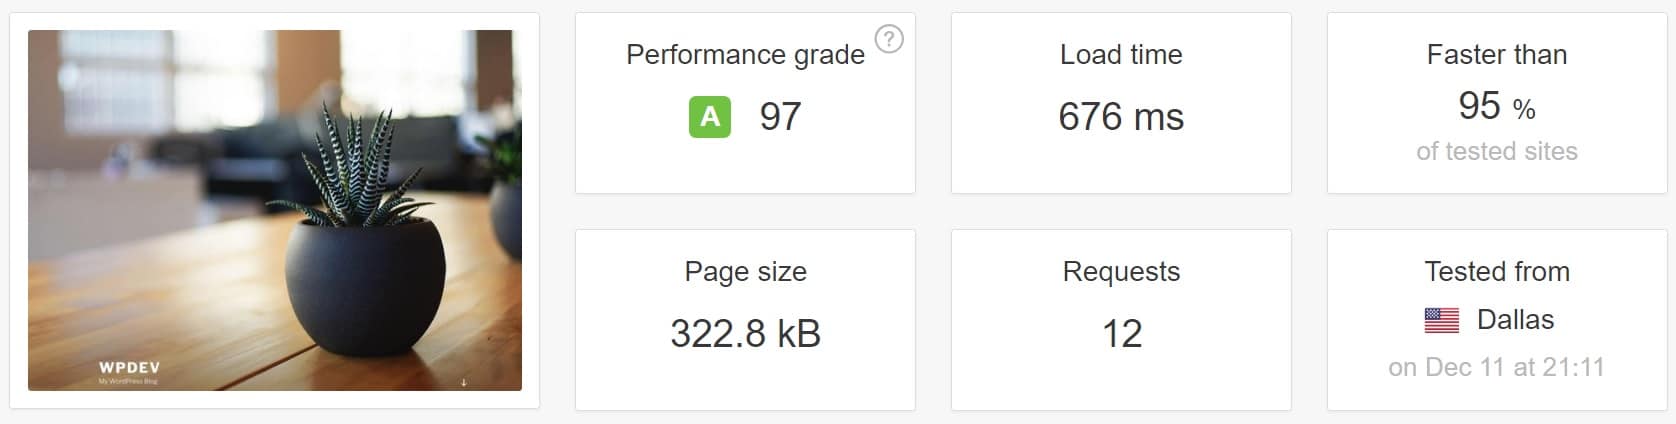 after pagespeed optimizations speed test